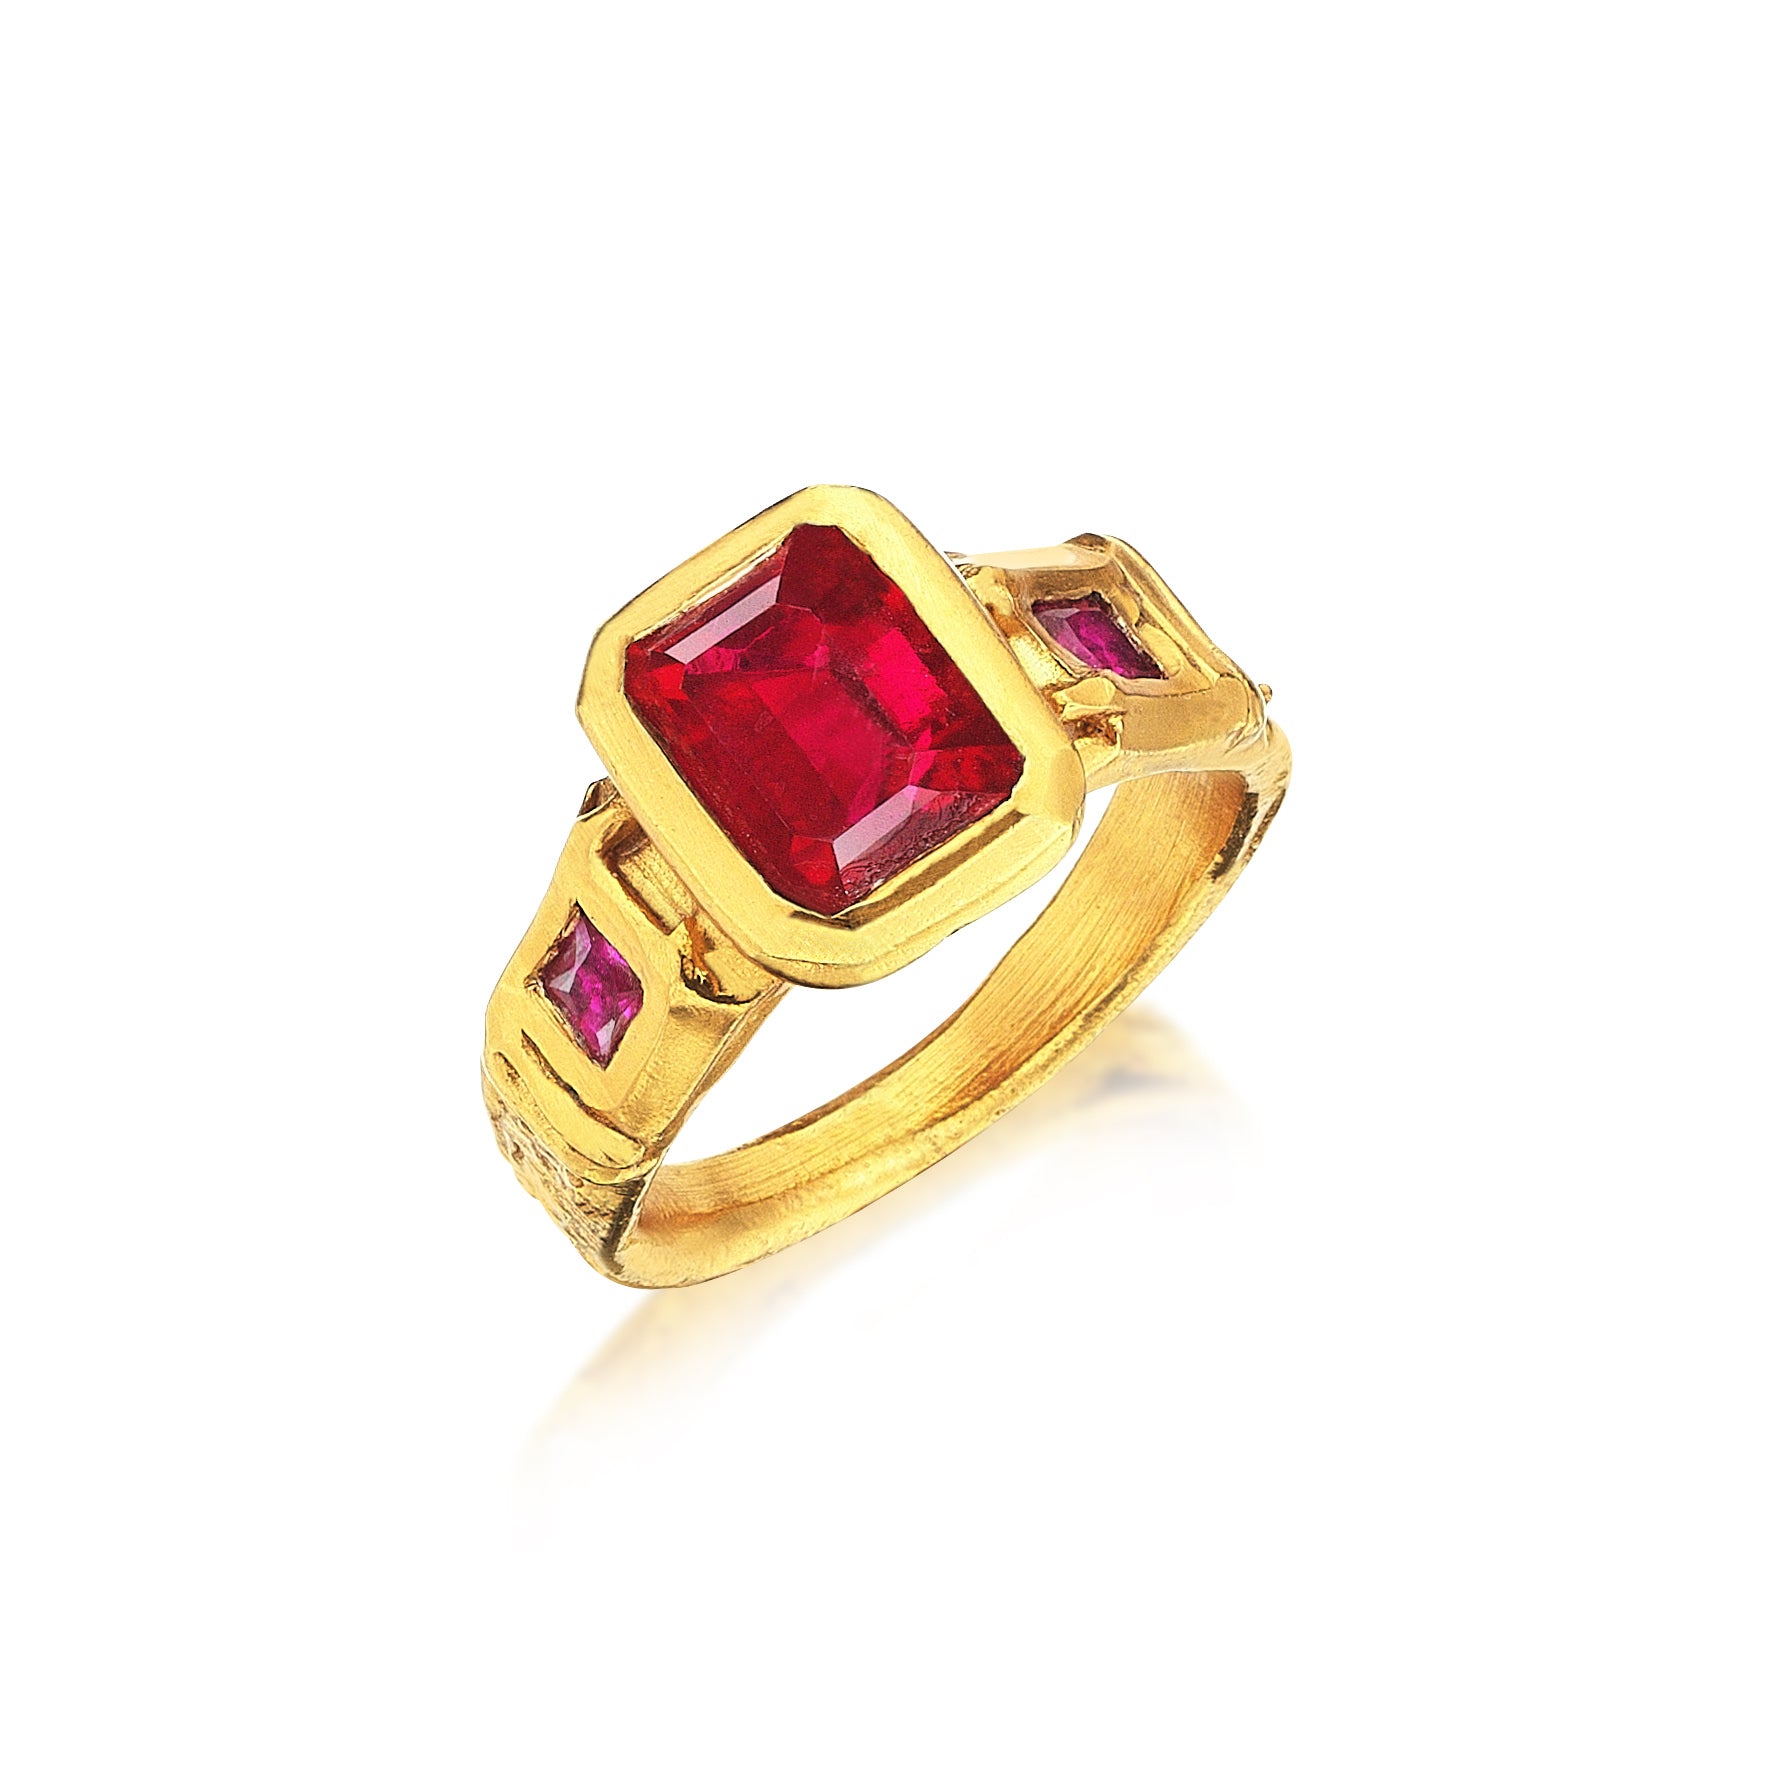 THE SCARLET RING